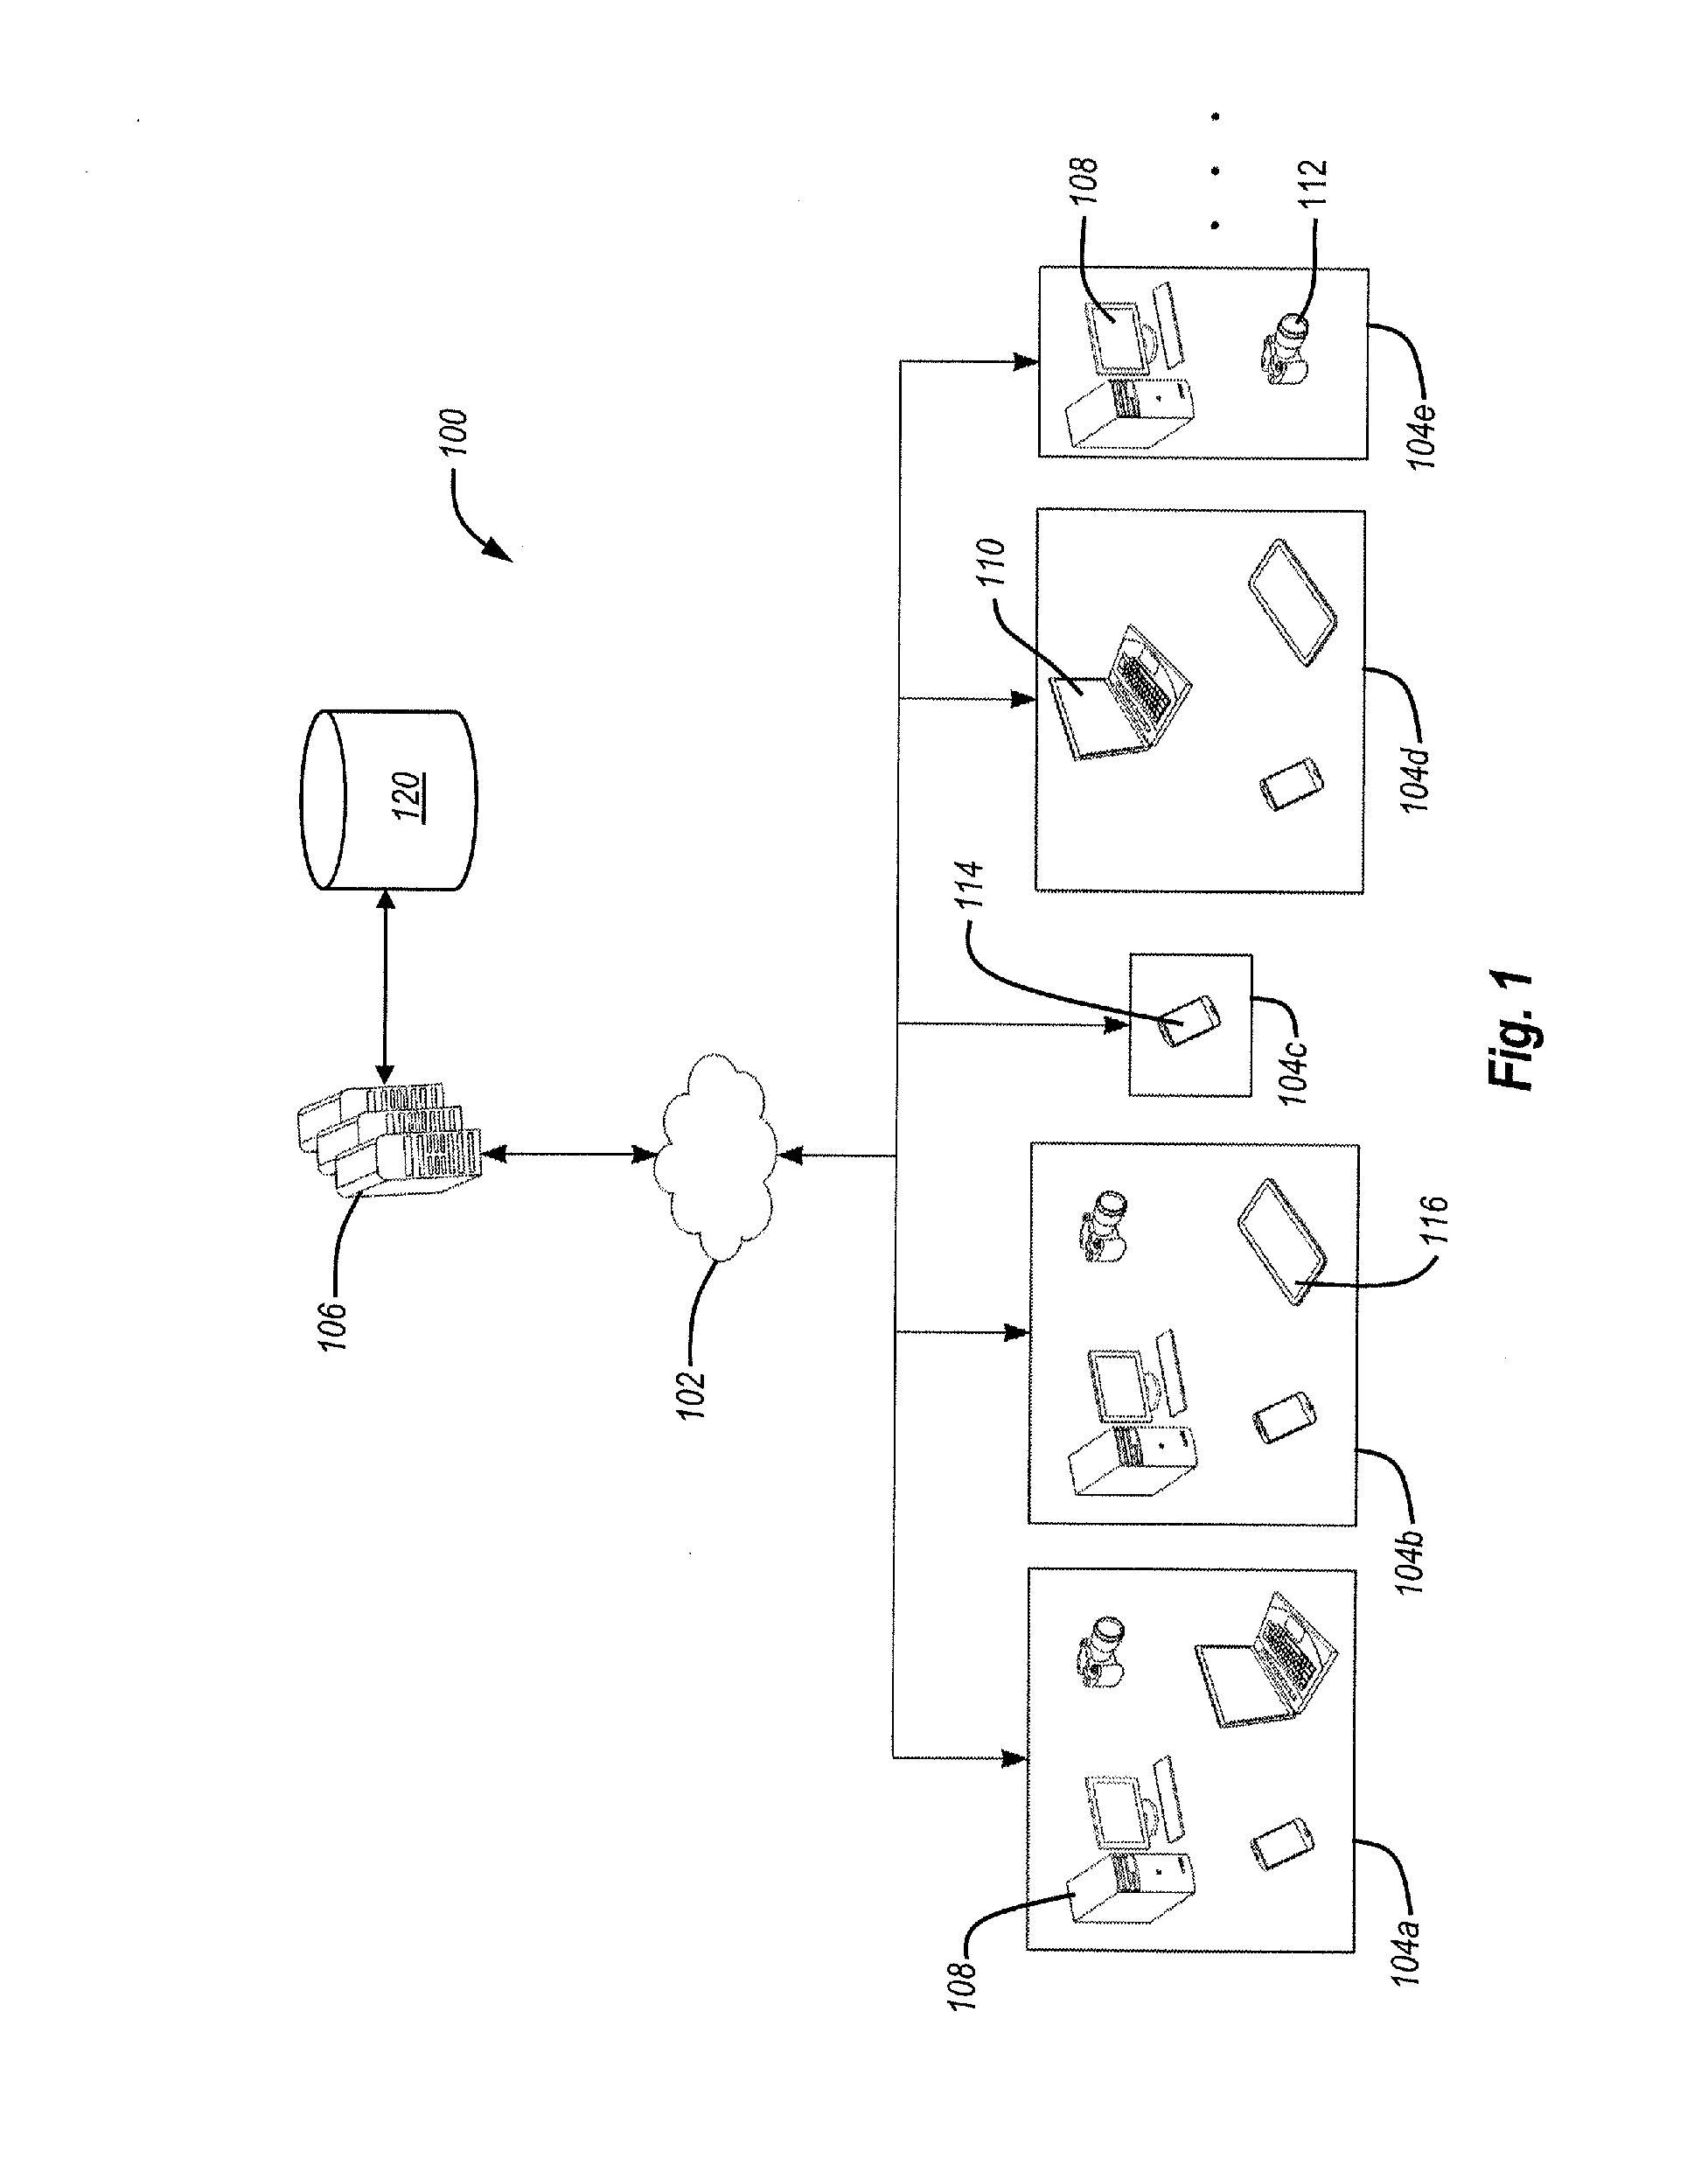 System for creating stories using images, and methods and interfaces associated therewith